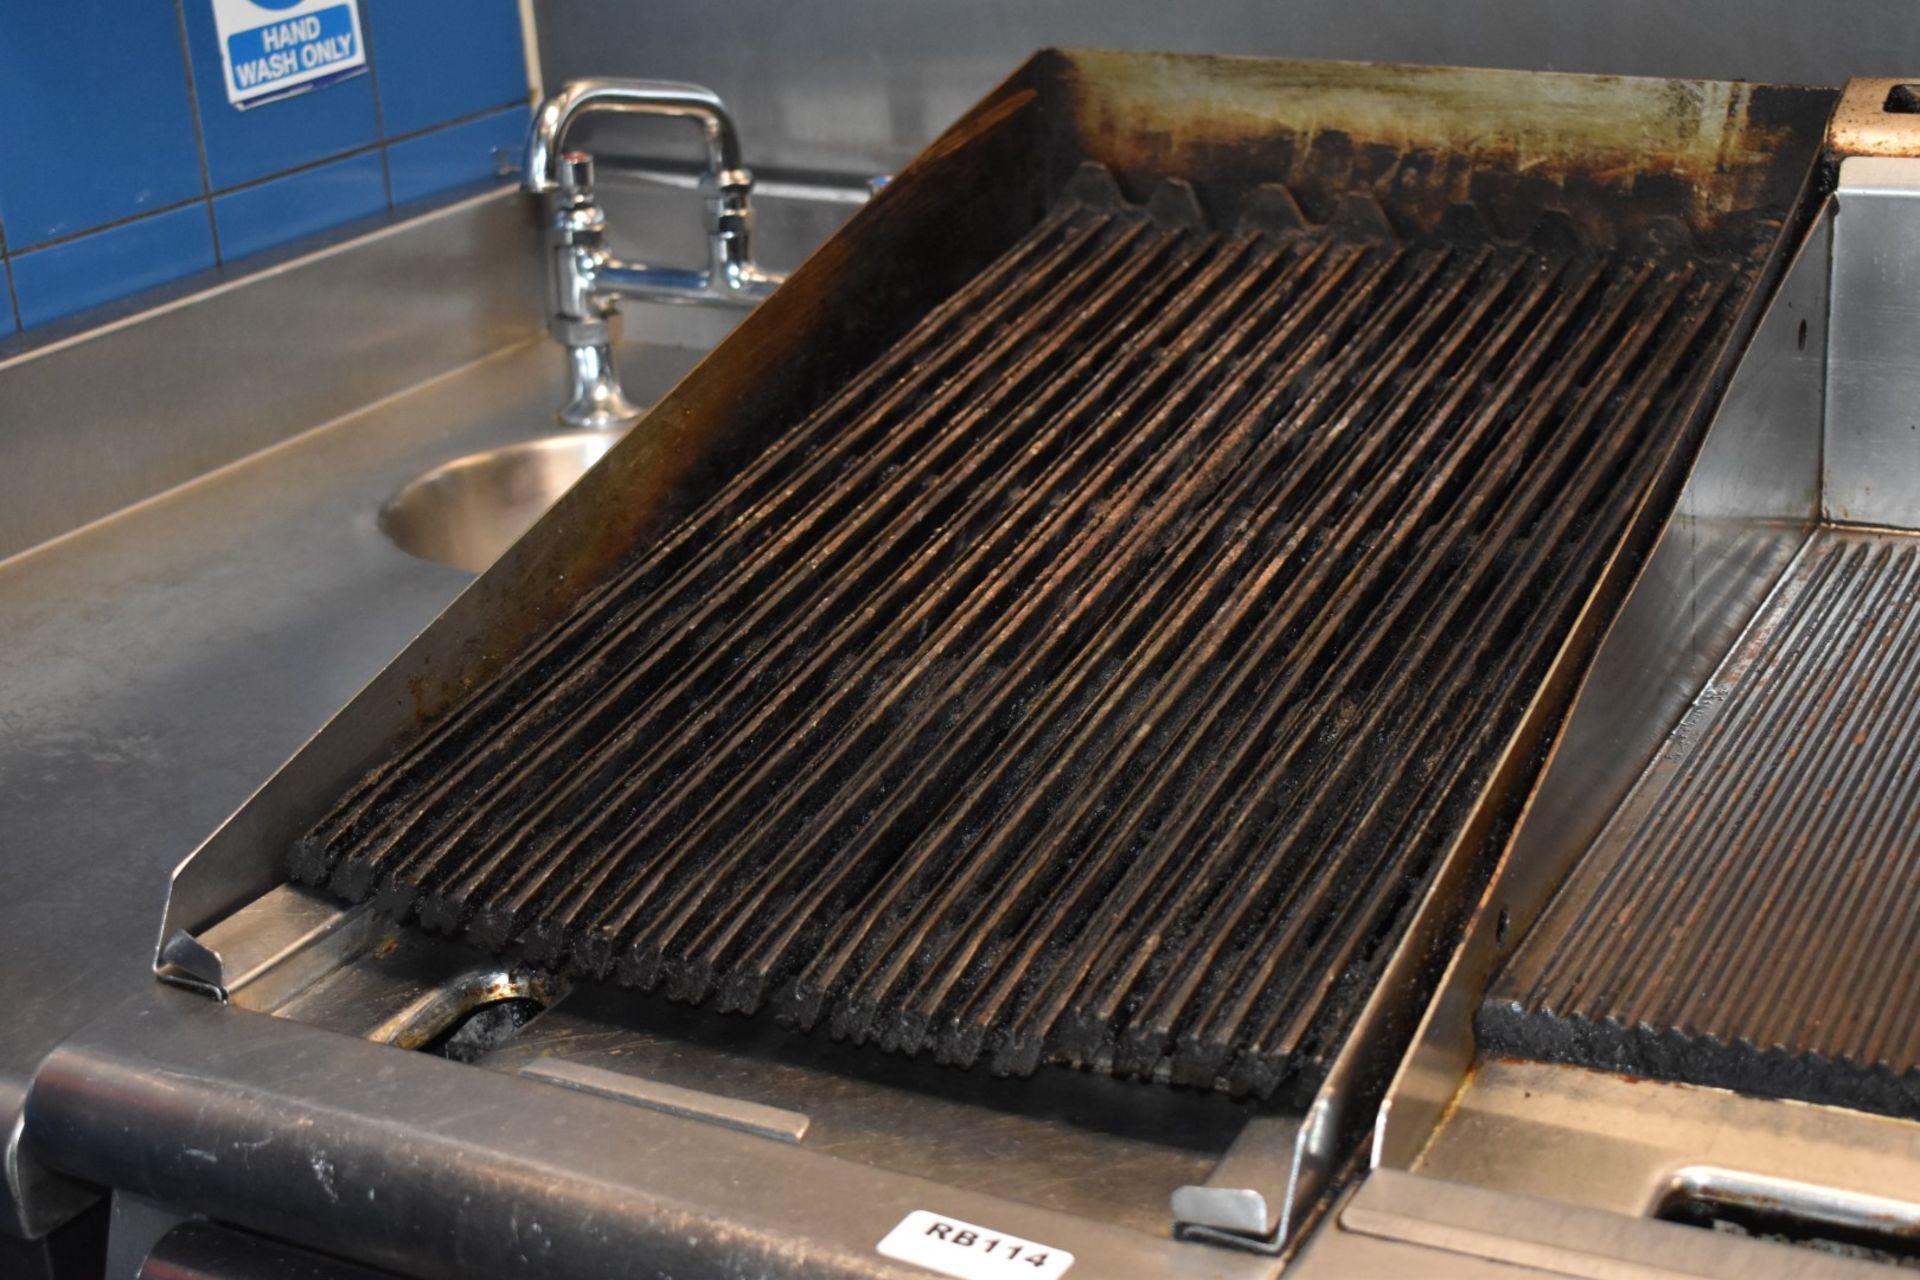 1 x Falcon Charcoal Gas Griddle - Size H41 x W40 x D78 cms - Ref: RB114 - CL558 - Location: - Image 2 of 4